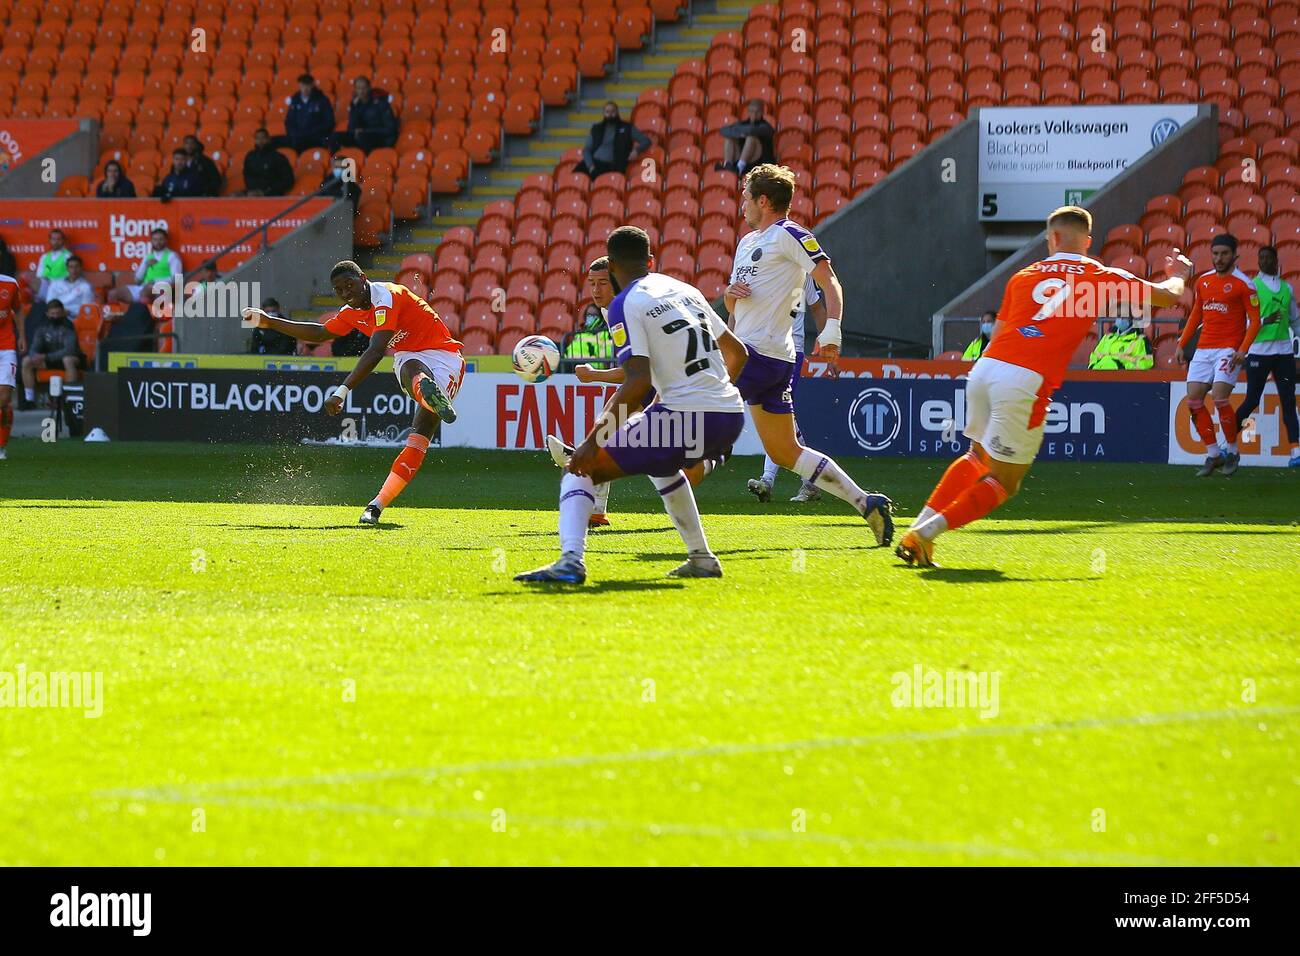 Bloomfield Road, Blackpool, UK. 24th Apr, 2021. Sullay Kaikai (10) of Blackpool with a great shot that is saved during the game Blackpool v Shrewsbury Sky Bet League One 2020/21 Bloomfield Road, Blackpool, England - 24th April 2021 Credit: Arthur Haigh/Alamy Live News Stock Photo